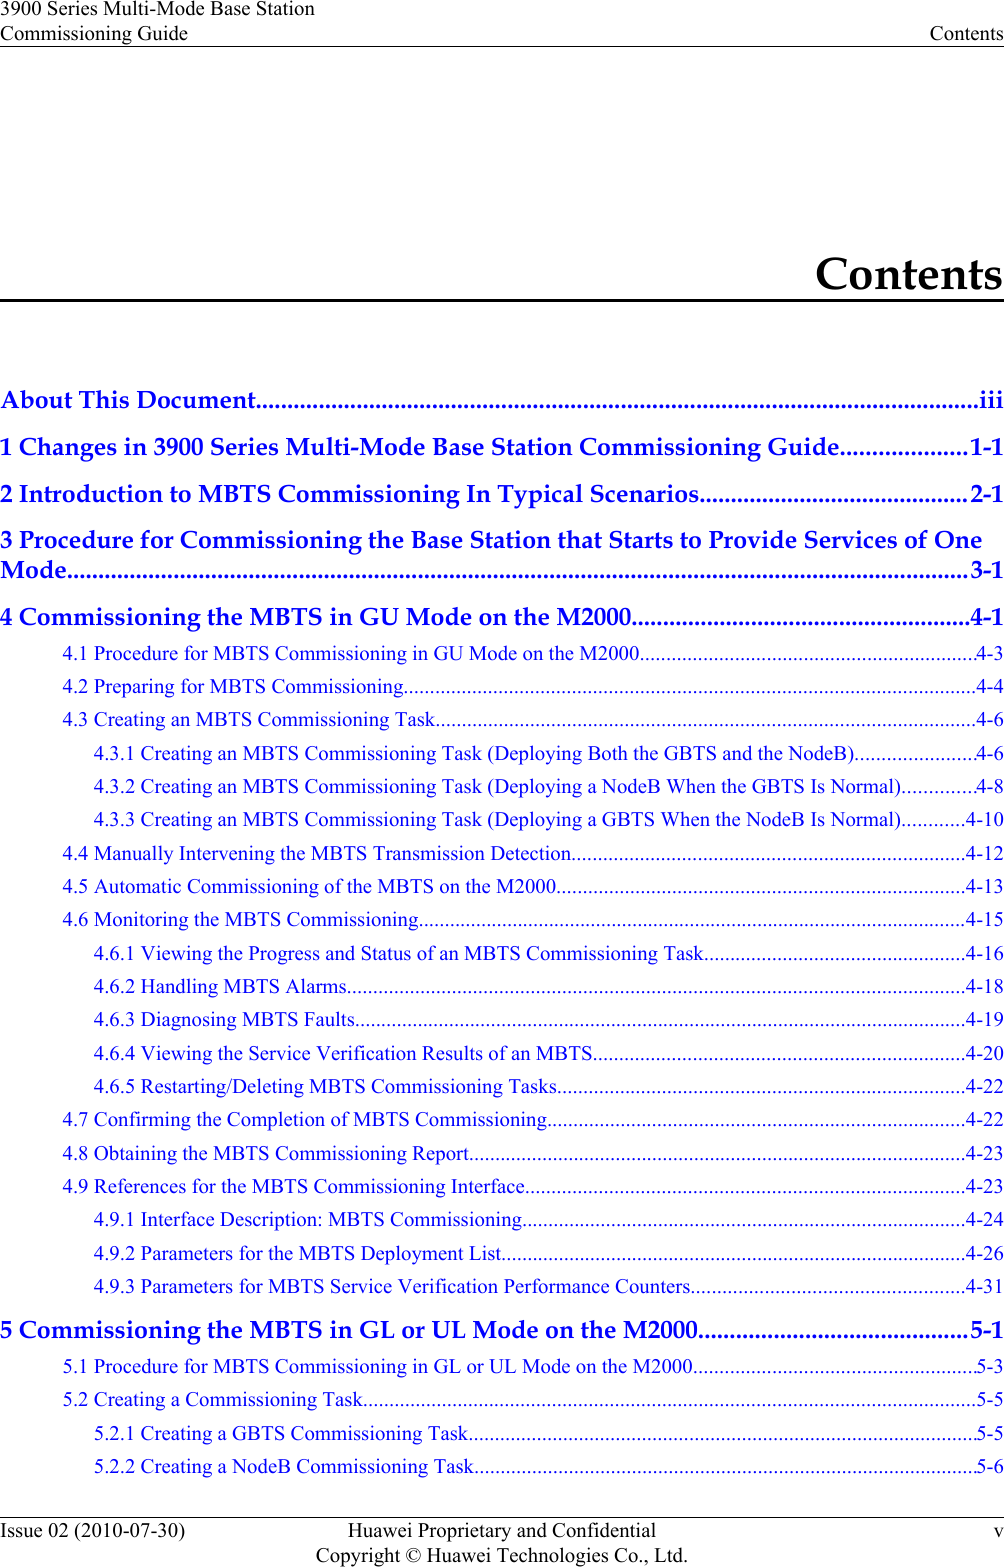 ContentsAbout This Document...................................................................................................................iii1 Changes in 3900 Series Multi-Mode Base Station Commissioning Guide....................1-12 Introduction to MBTS Commissioning In Typical Scenarios...........................................2-13 Procedure for Commissioning the Base Station that Starts to Provide Services of OneMode................................................................................................................................................3-14 Commissioning the MBTS in GU Mode on the M2000......................................................4-14.1 Procedure for MBTS Commissioning in GU Mode on the M2000................................................................4-34.2 Preparing for MBTS Commissioning.............................................................................................................4-44.3 Creating an MBTS Commissioning Task.......................................................................................................4-64.3.1 Creating an MBTS Commissioning Task (Deploying Both the GBTS and the NodeB).......................4-64.3.2 Creating an MBTS Commissioning Task (Deploying a NodeB When the GBTS Is Normal)..............4-84.3.3 Creating an MBTS Commissioning Task (Deploying a GBTS When the NodeB Is Normal)............4-104.4 Manually Intervening the MBTS Transmission Detection...........................................................................4-124.5 Automatic Commissioning of the MBTS on the M2000..............................................................................4-134.6 Monitoring the MBTS Commissioning.........................................................................................................4-154.6.1 Viewing the Progress and Status of an MBTS Commissioning Task..................................................4-164.6.2 Handling MBTS Alarms......................................................................................................................4-184.6.3 Diagnosing MBTS Faults.....................................................................................................................4-194.6.4 Viewing the Service Verification Results of an MBTS.......................................................................4-204.6.5 Restarting/Deleting MBTS Commissioning Tasks..............................................................................4-224.7 Confirming the Completion of MBTS Commissioning................................................................................4-224.8 Obtaining the MBTS Commissioning Report...............................................................................................4-234.9 References for the MBTS Commissioning Interface....................................................................................4-234.9.1 Interface Description: MBTS Commissioning.....................................................................................4-244.9.2 Parameters for the MBTS Deployment List.........................................................................................4-264.9.3 Parameters for MBTS Service Verification Performance Counters....................................................4-315 Commissioning the MBTS in GL or UL Mode on the M2000...........................................5-15.1 Procedure for MBTS Commissioning in GL or UL Mode on the M2000......................................................5-35.2 Creating a Commissioning Task.....................................................................................................................5-55.2.1 Creating a GBTS Commissioning Task.................................................................................................5-55.2.2 Creating a NodeB Commissioning Task................................................................................................5-63900 Series Multi-Mode Base StationCommissioning Guide ContentsIssue 02 (2010-07-30) Huawei Proprietary and ConfidentialCopyright © Huawei Technologies Co., Ltd.v